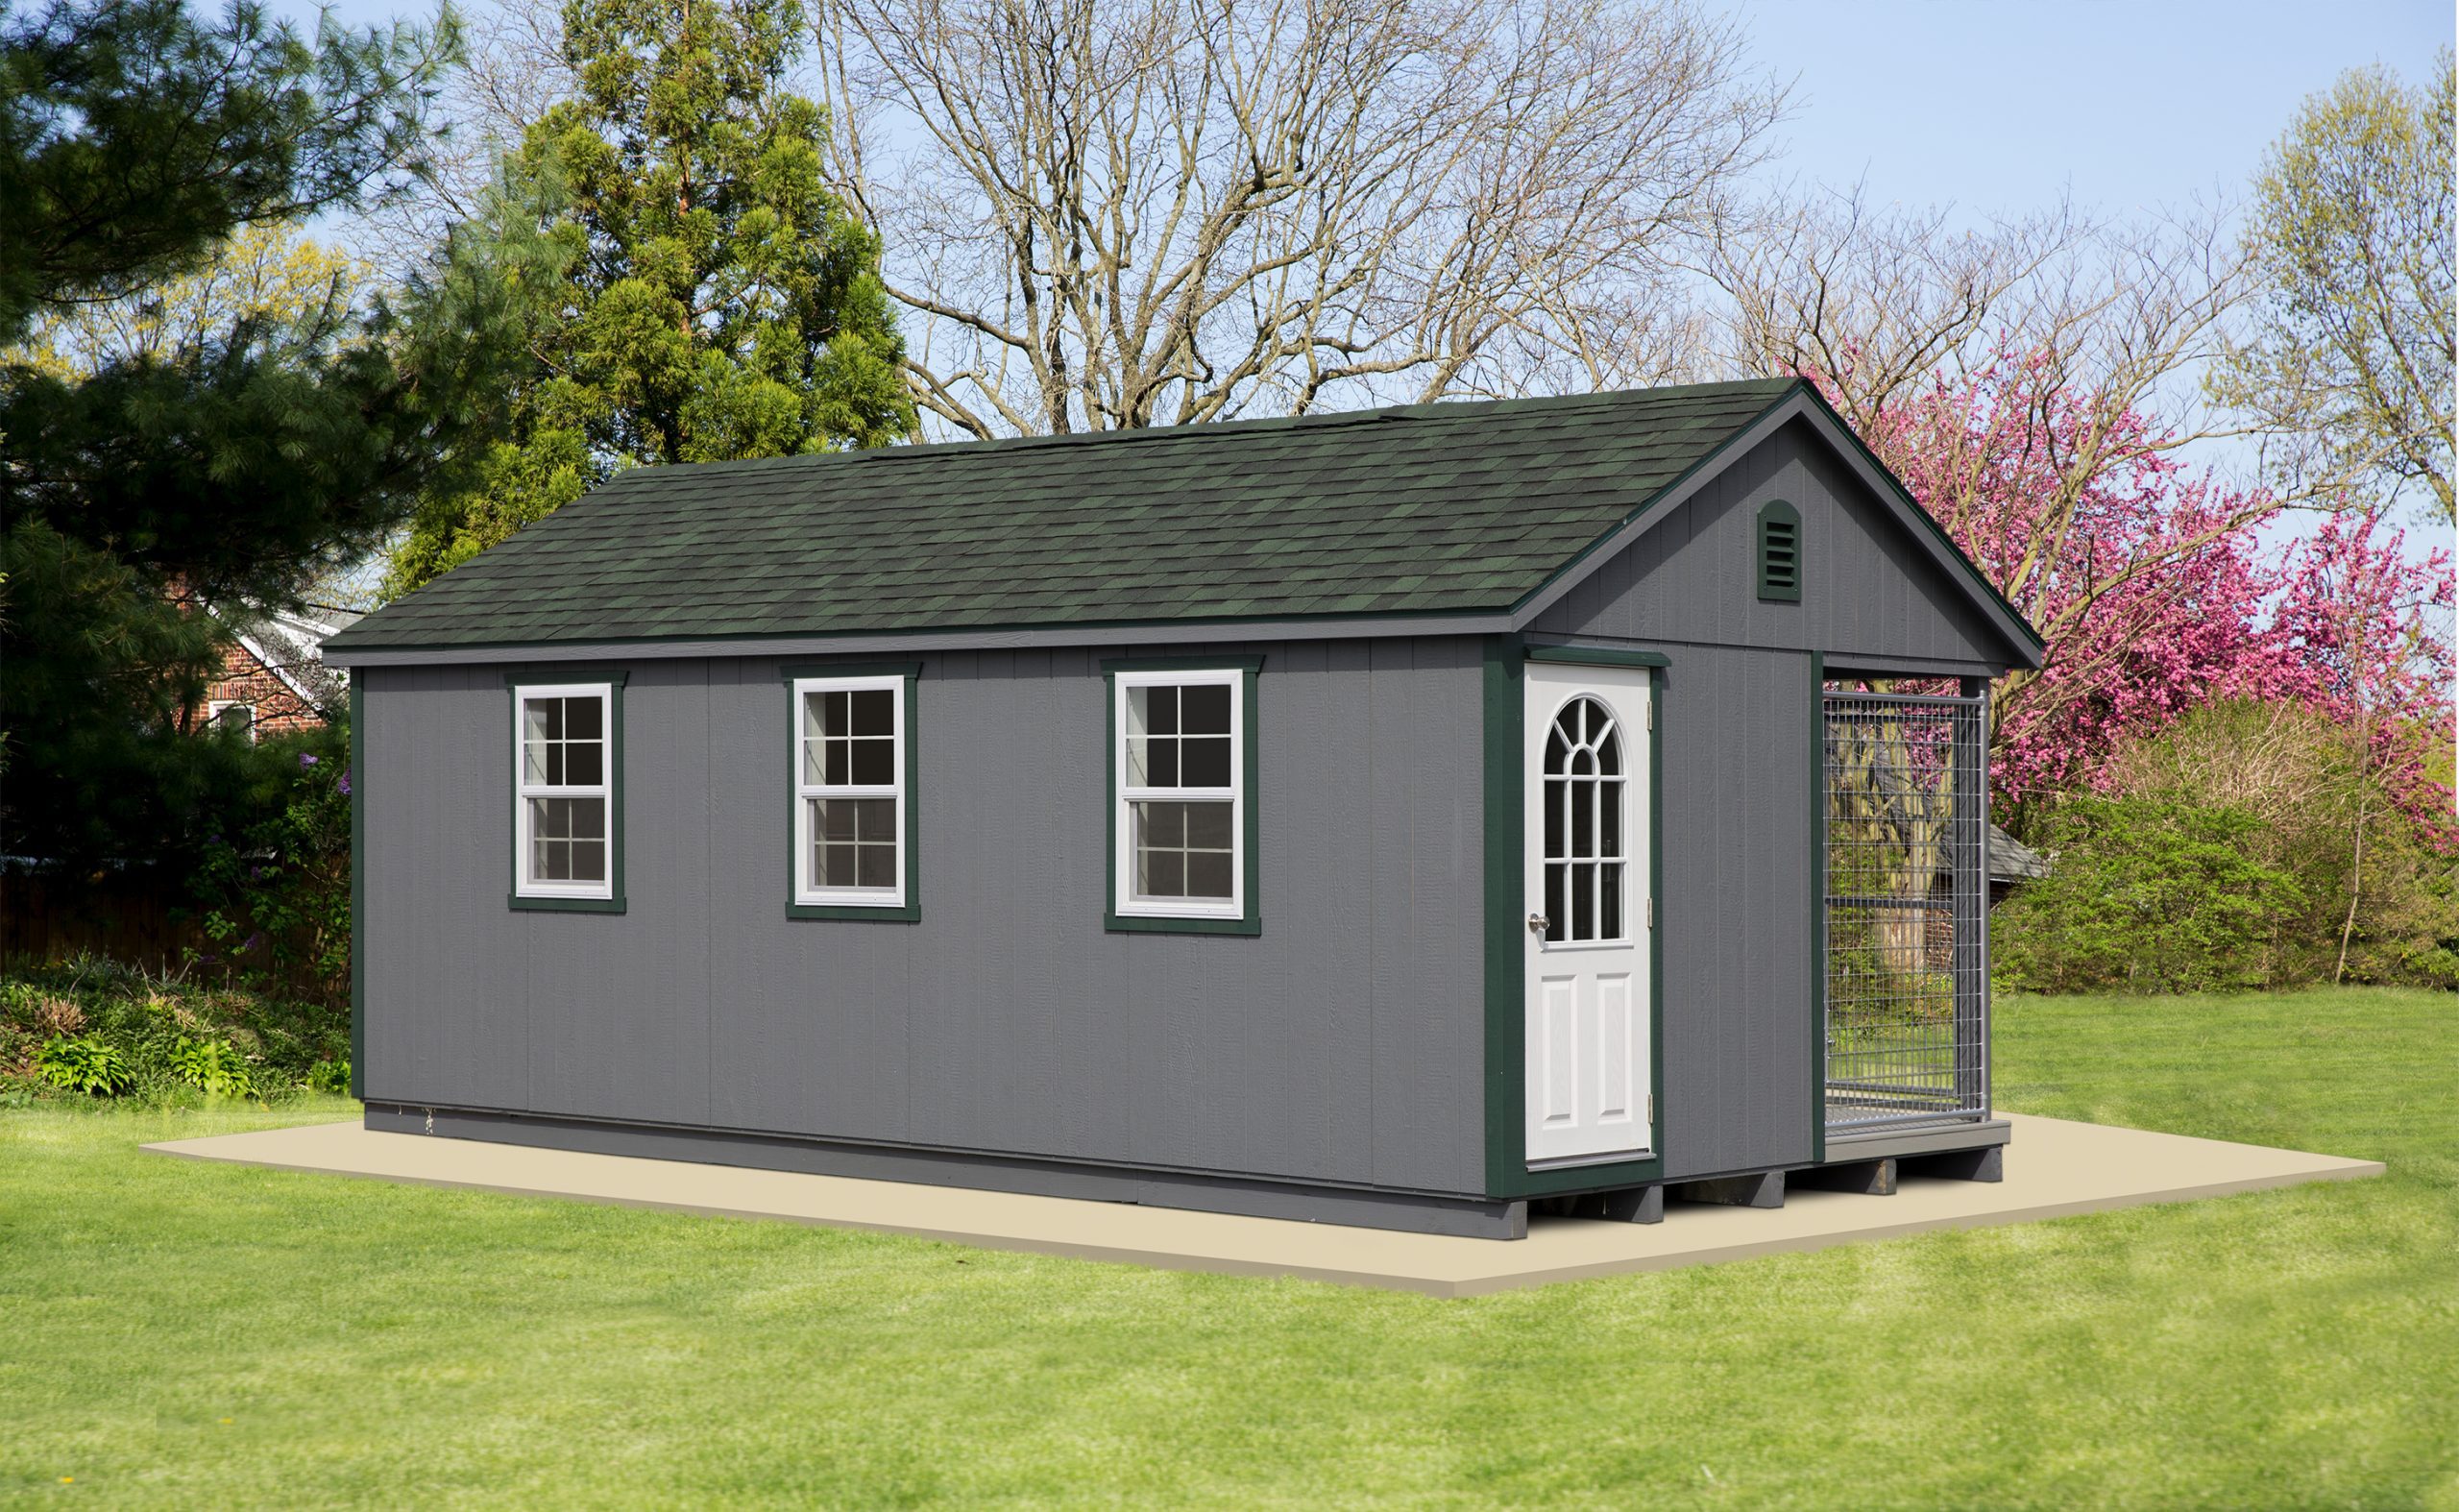 12x22 Commercial Kennel with 6 dog runs, dark gray siding, green roofing, and green trim.